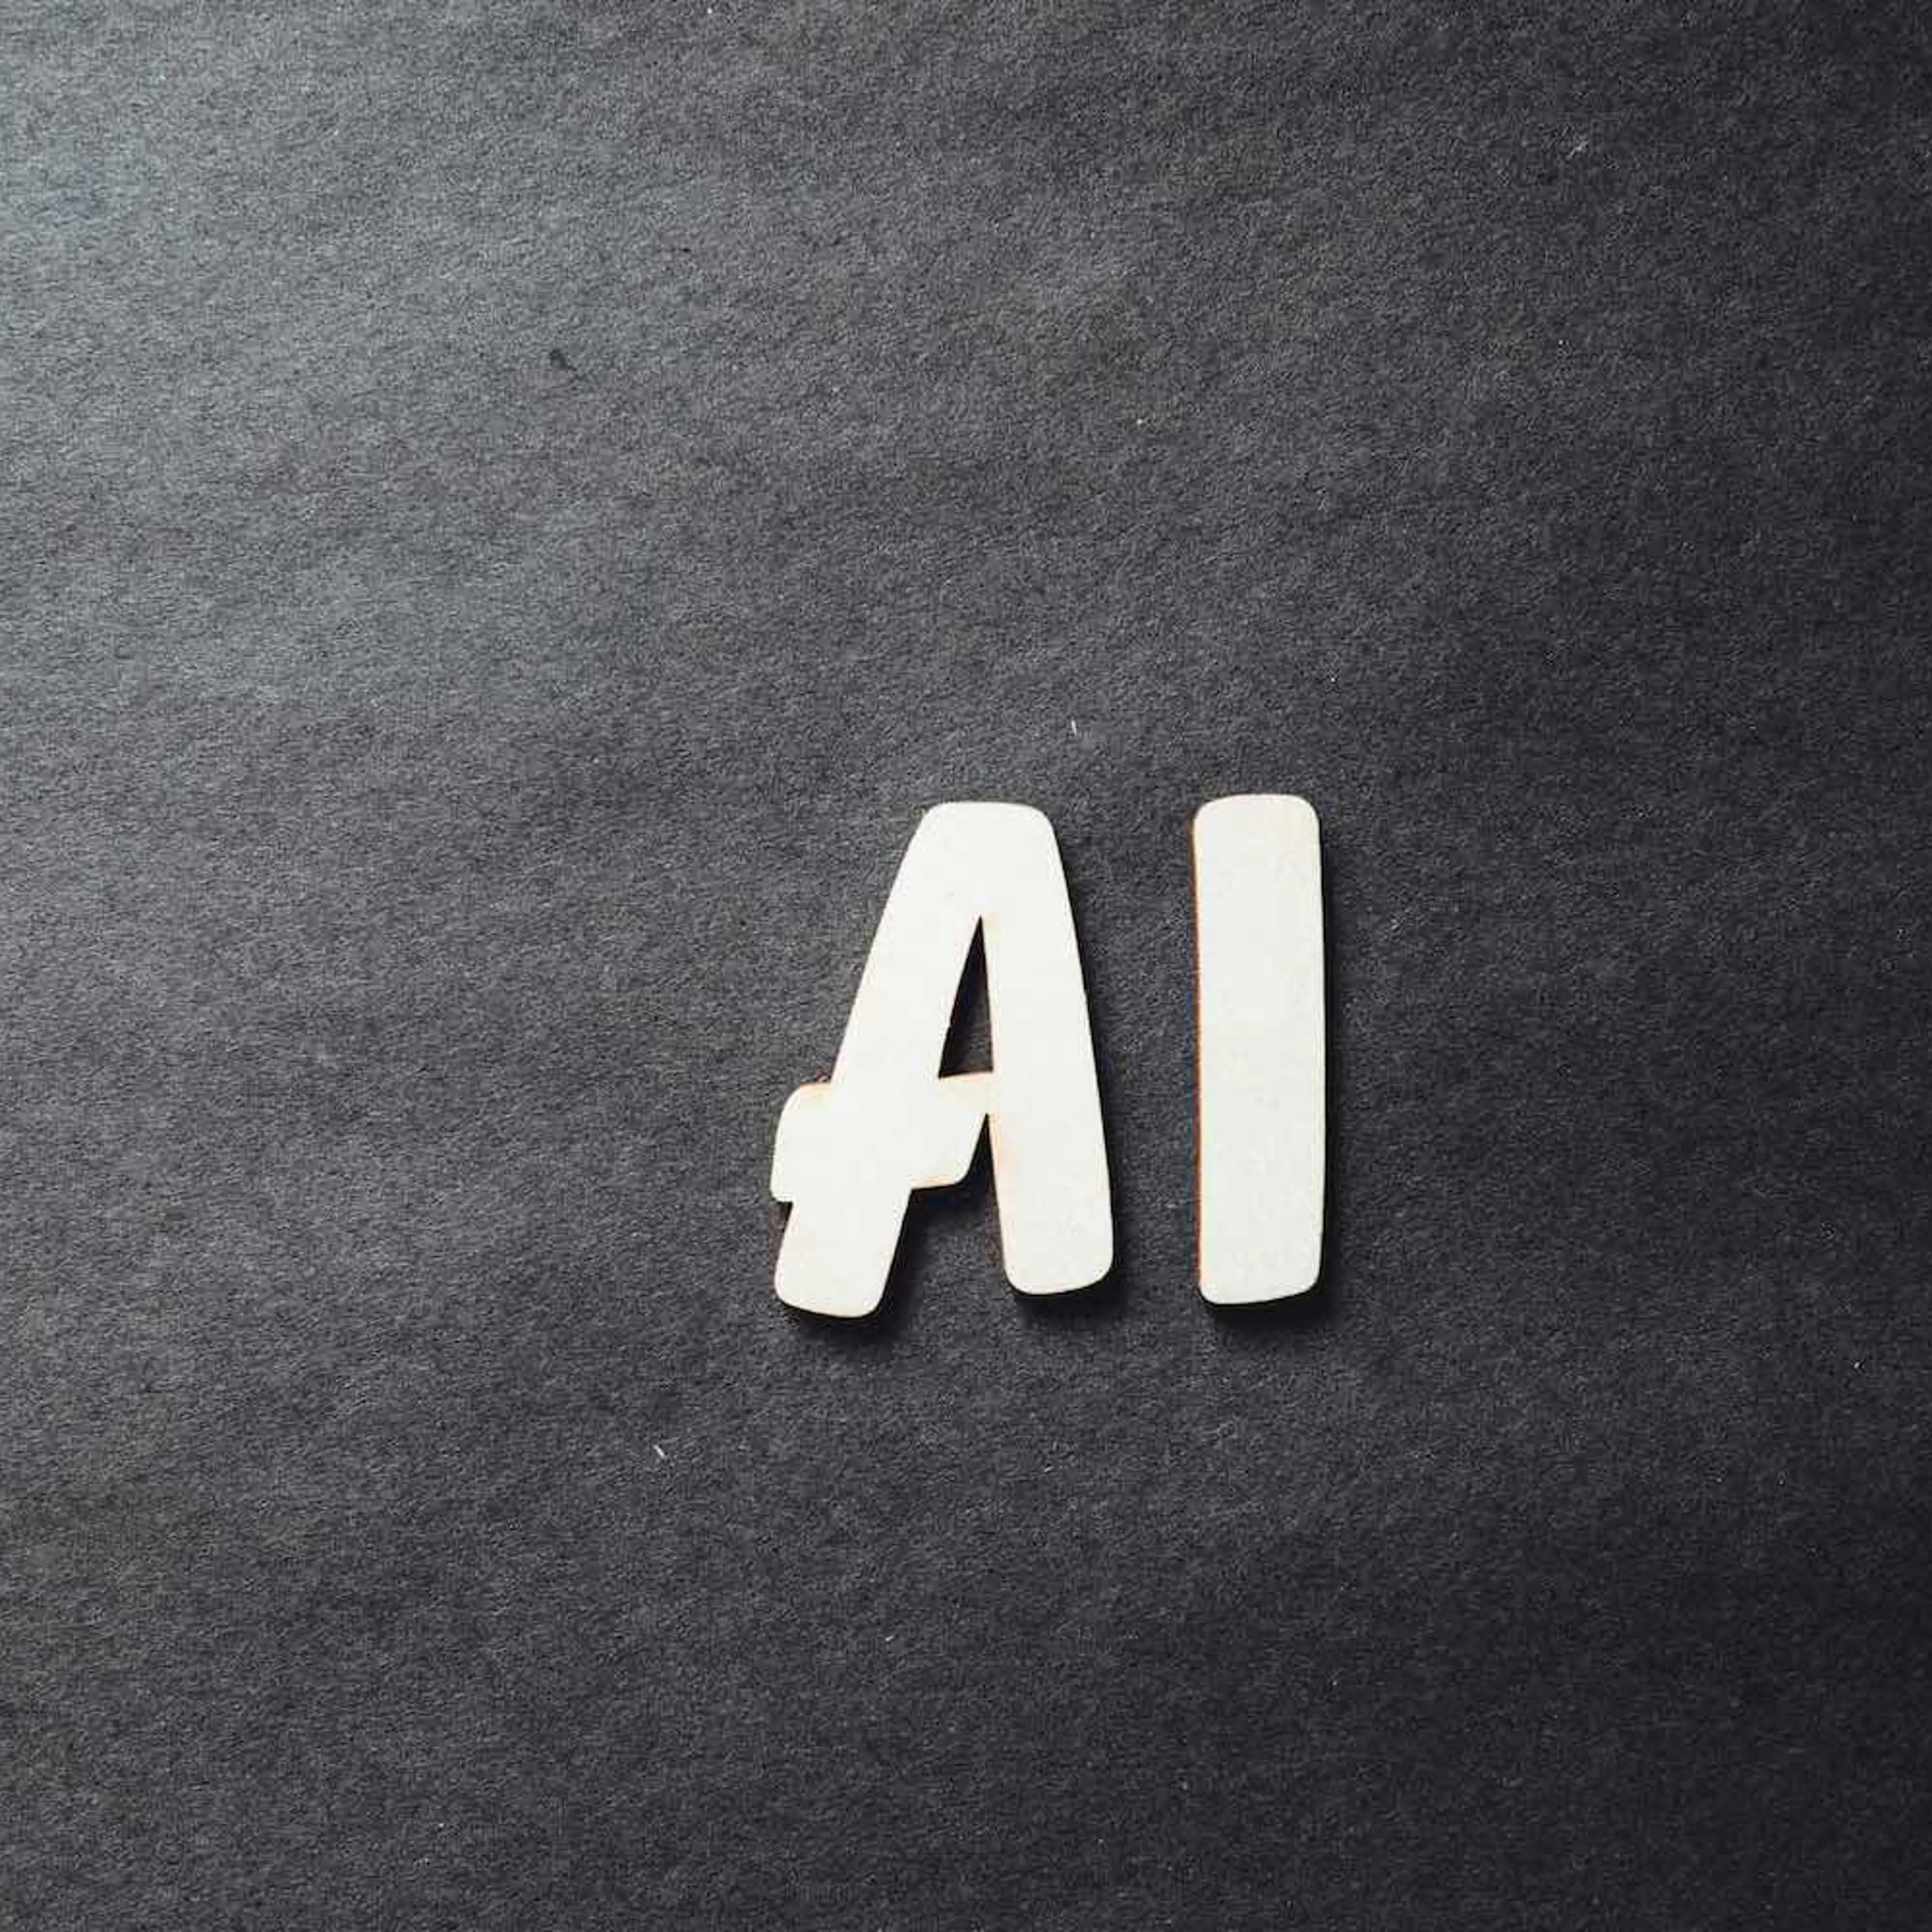 AI written in white letters on a black background